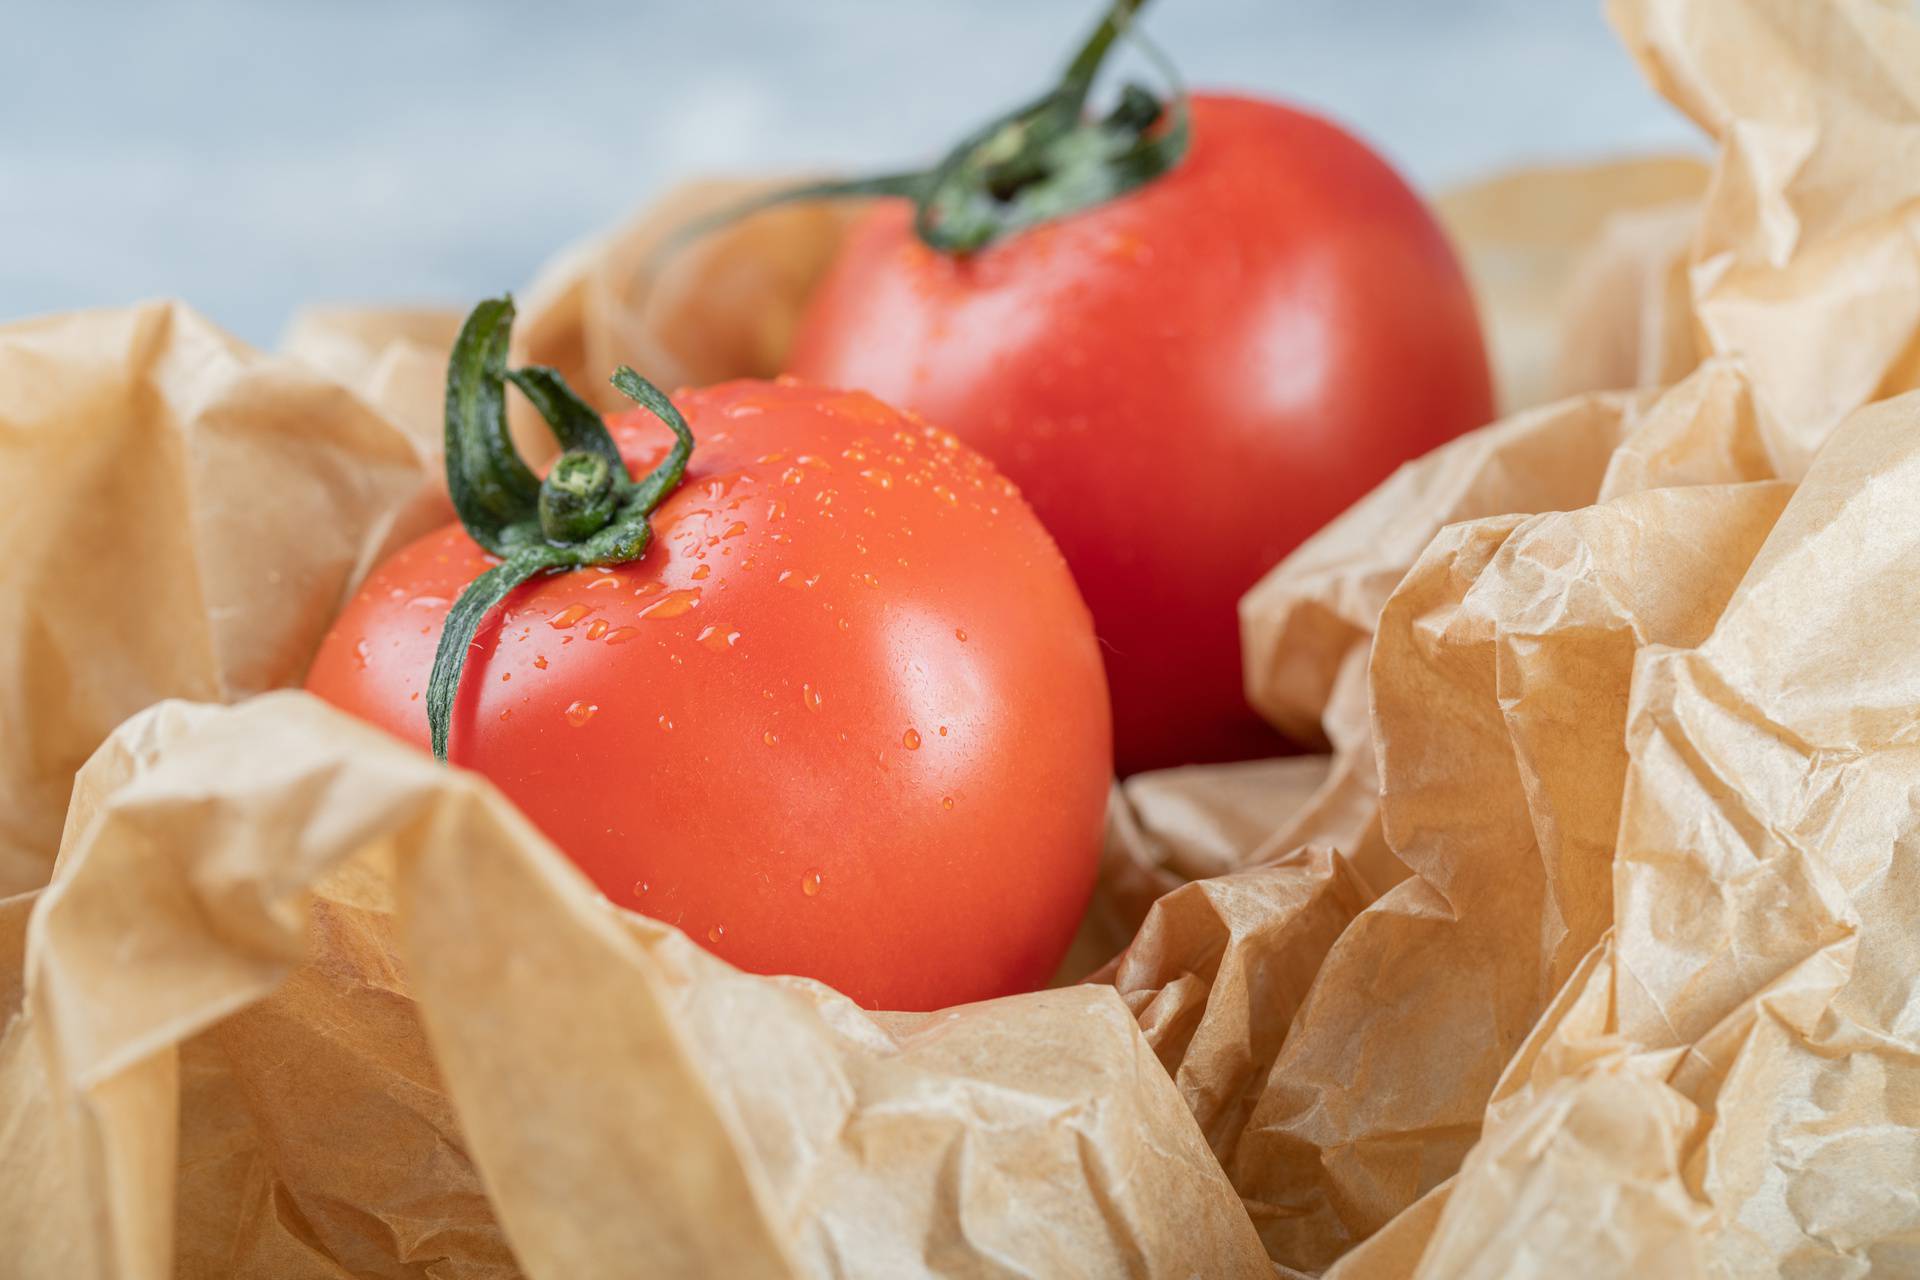 Two fresh whole tomatoes on a parchment paper